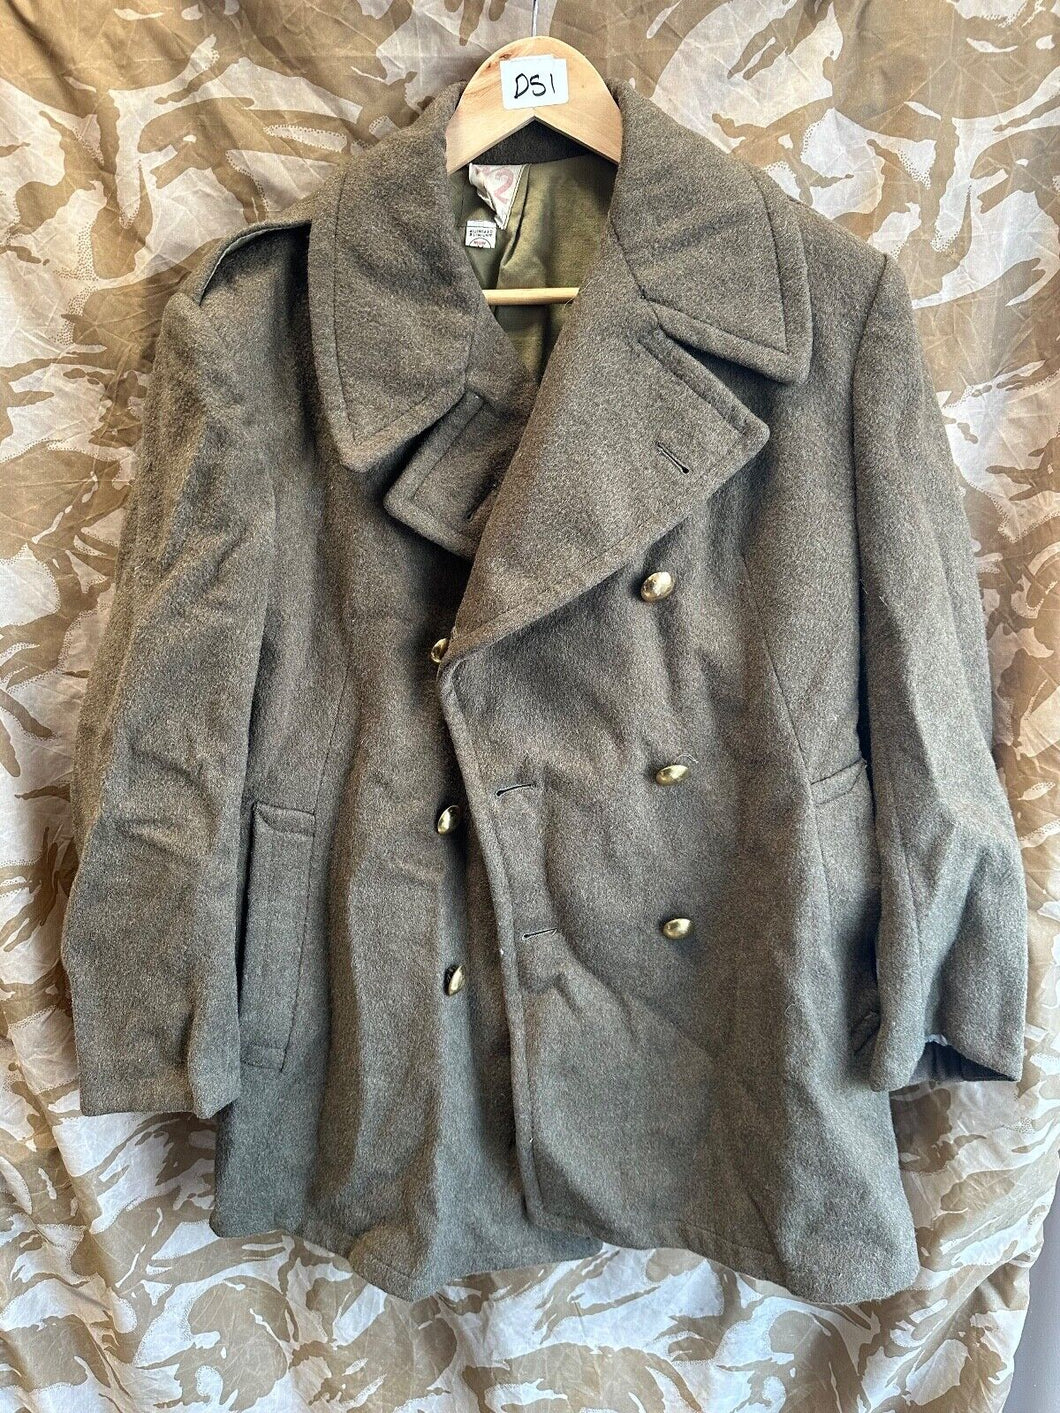 Genuine French Army Greatcoat - Ideal as WW2 US Army Jeep Coat - 38